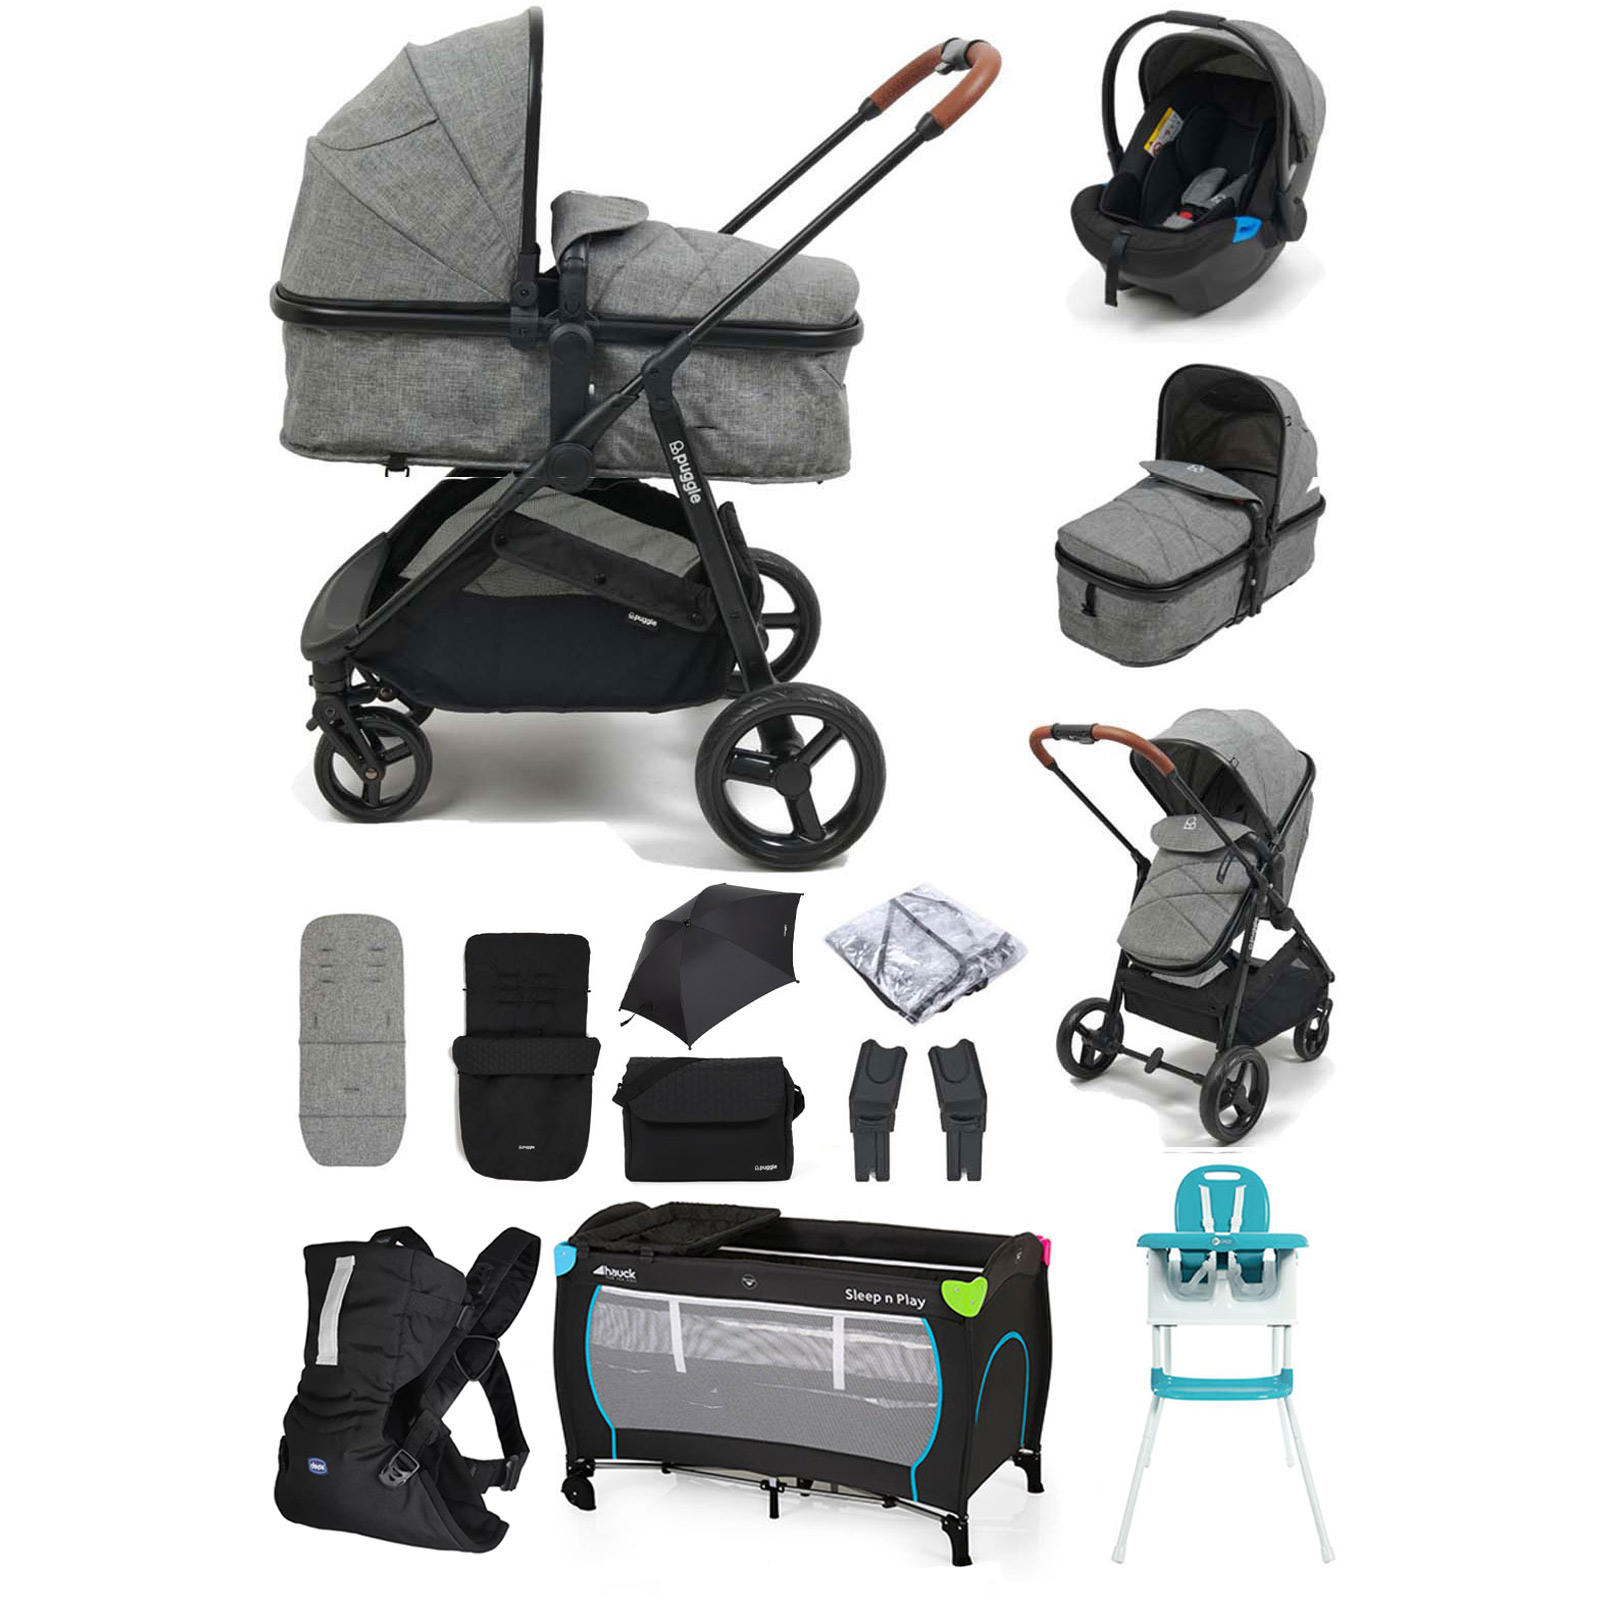 Puggle Monaco XT 2in1 Pram Pushchair Everything You Need Travel System with Footmuff, Changing Bag & Parasol - Graphite Grey